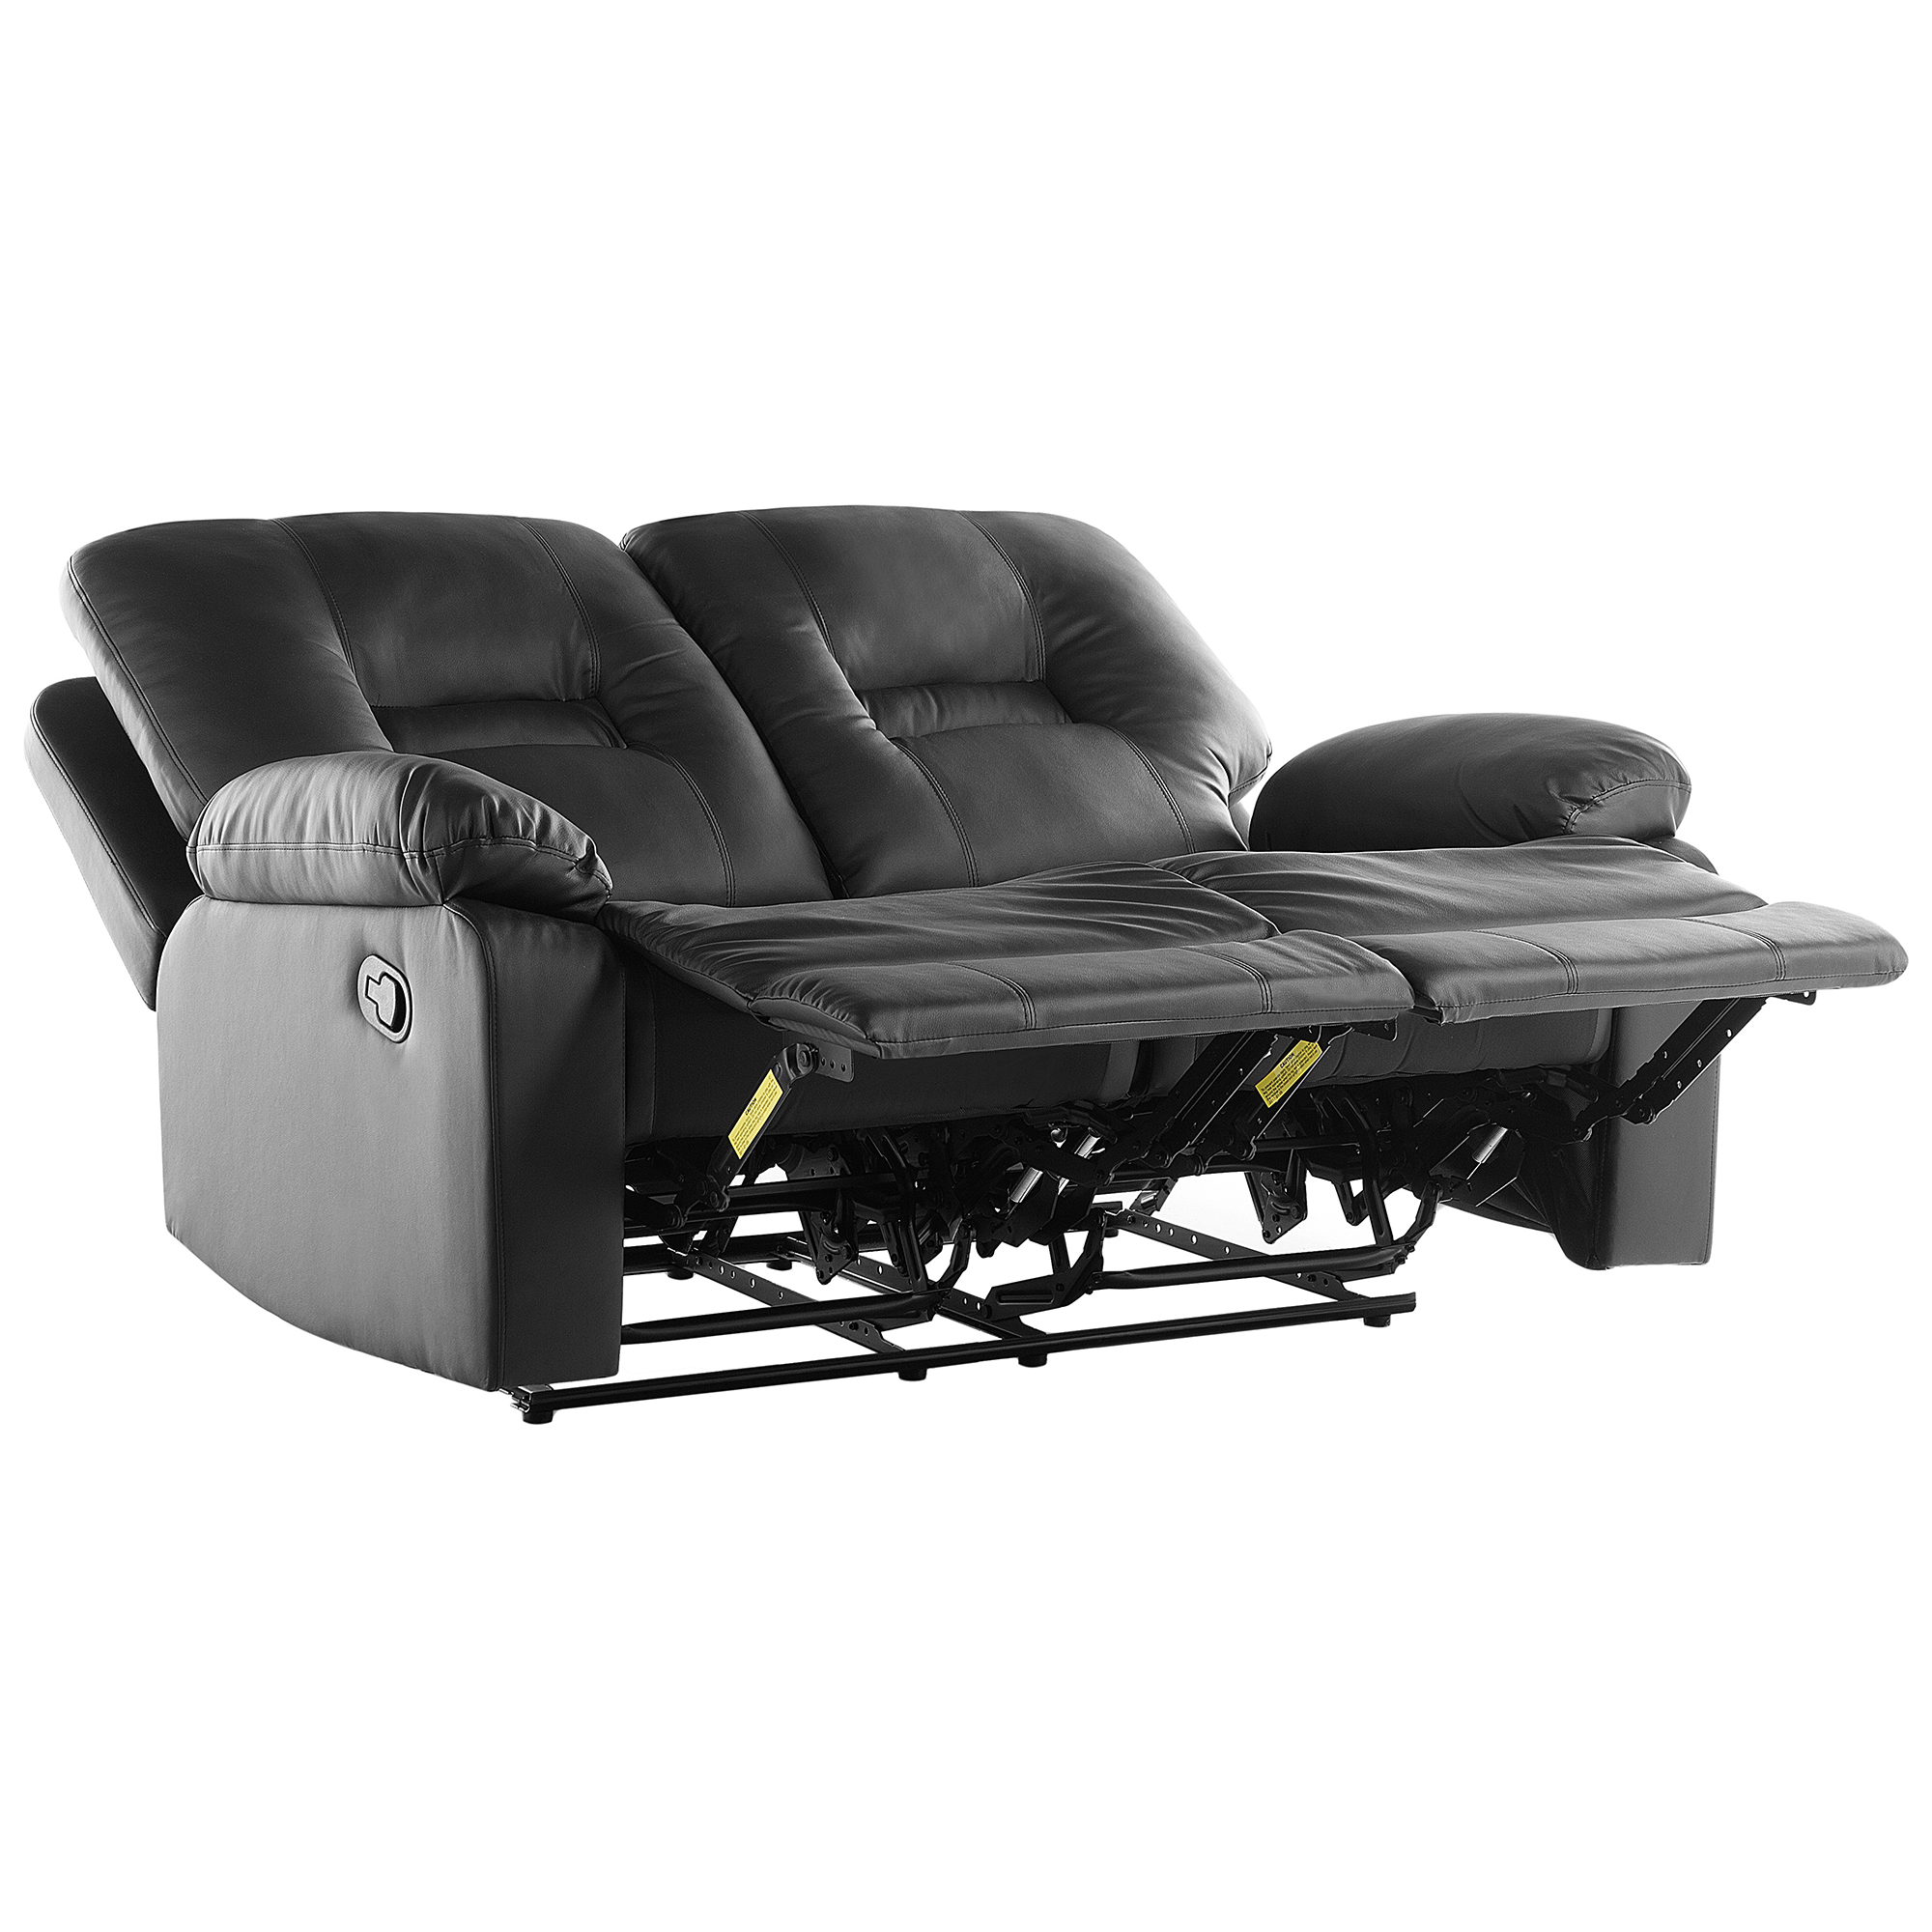 Beliani Recliner Sofa Black 2 Seater Faux Leather Manually Adjustable Back and Footrest